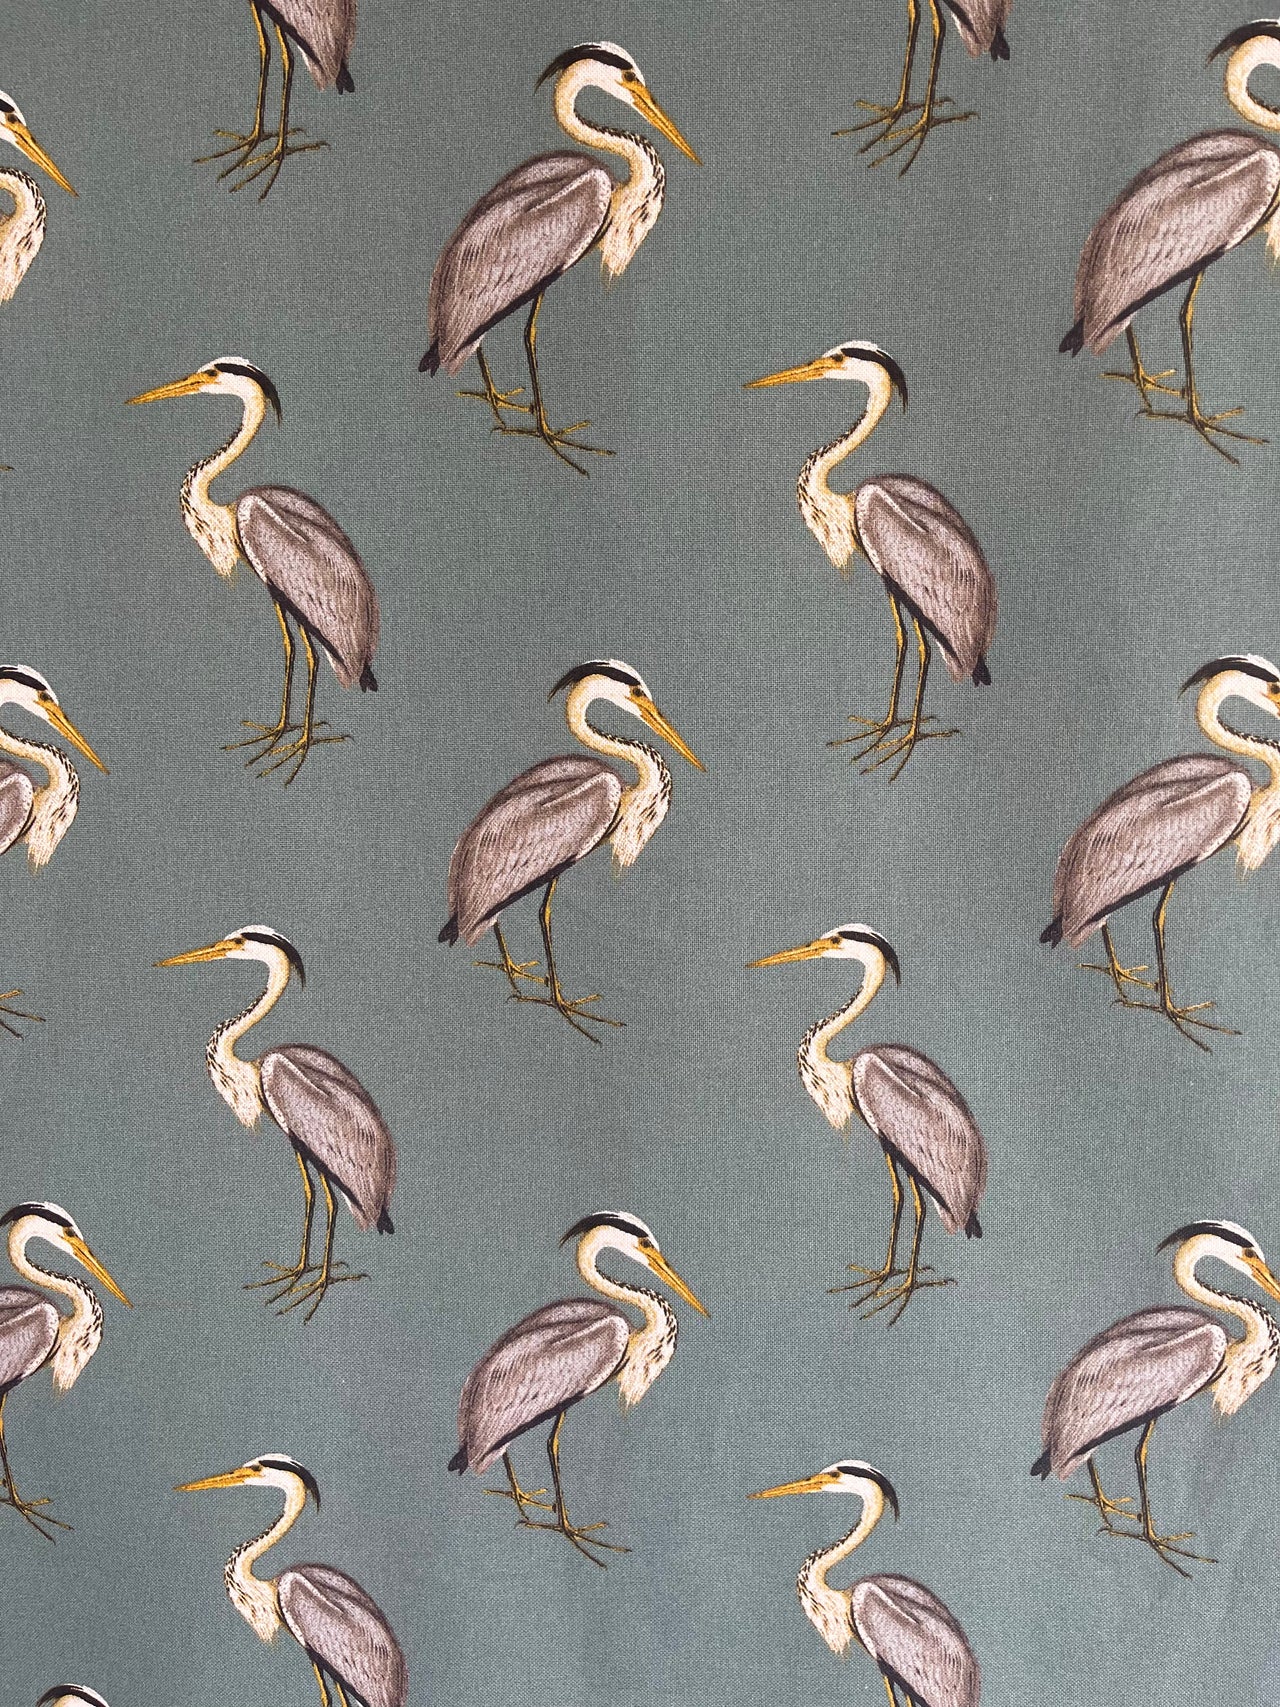 Herons Printed Cotton Fabric by The Meter Grey Sewing Material Birds Textile